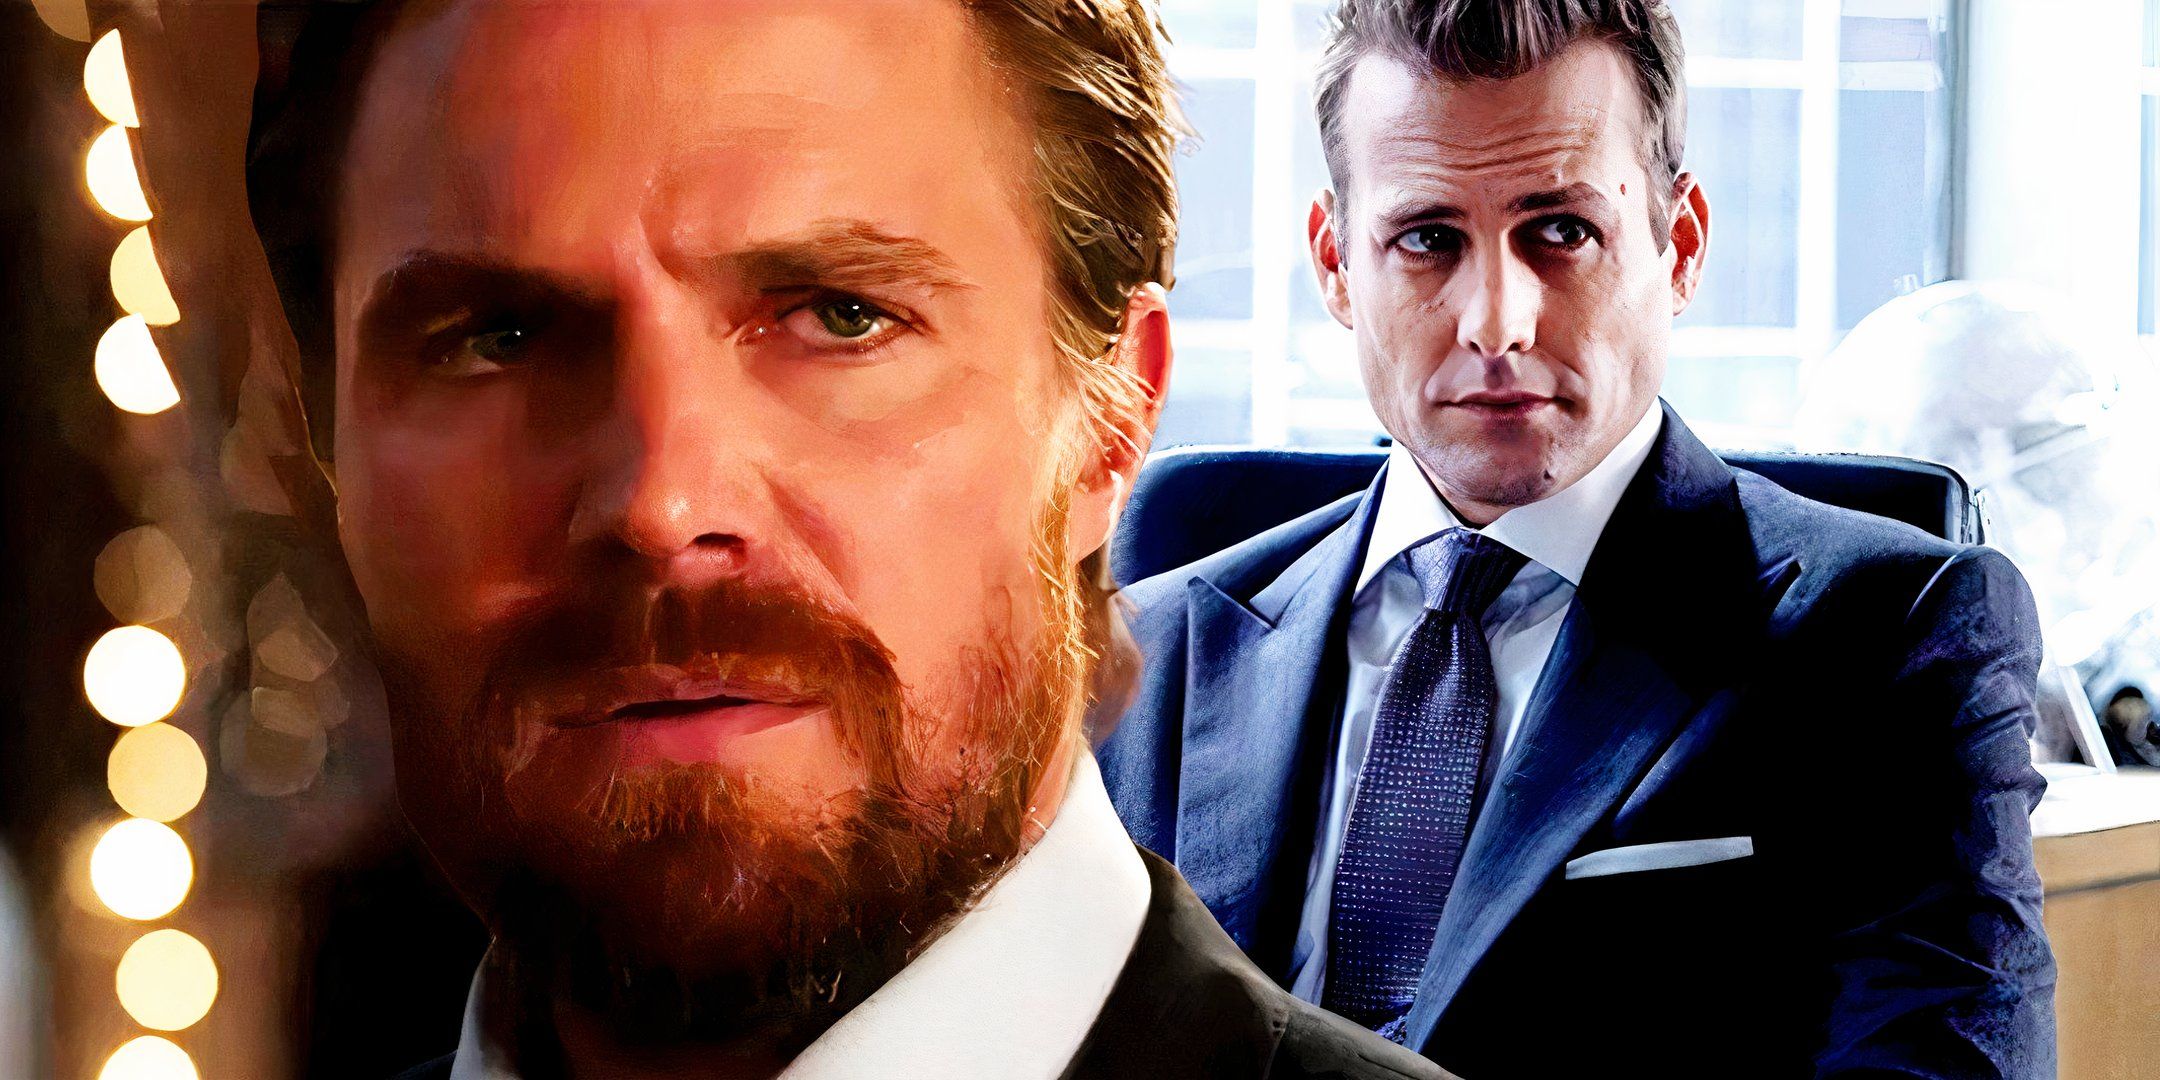 Stephen Amell as Oliver Queen in the Arrow and Gabriel Macht as Harvey in Suits